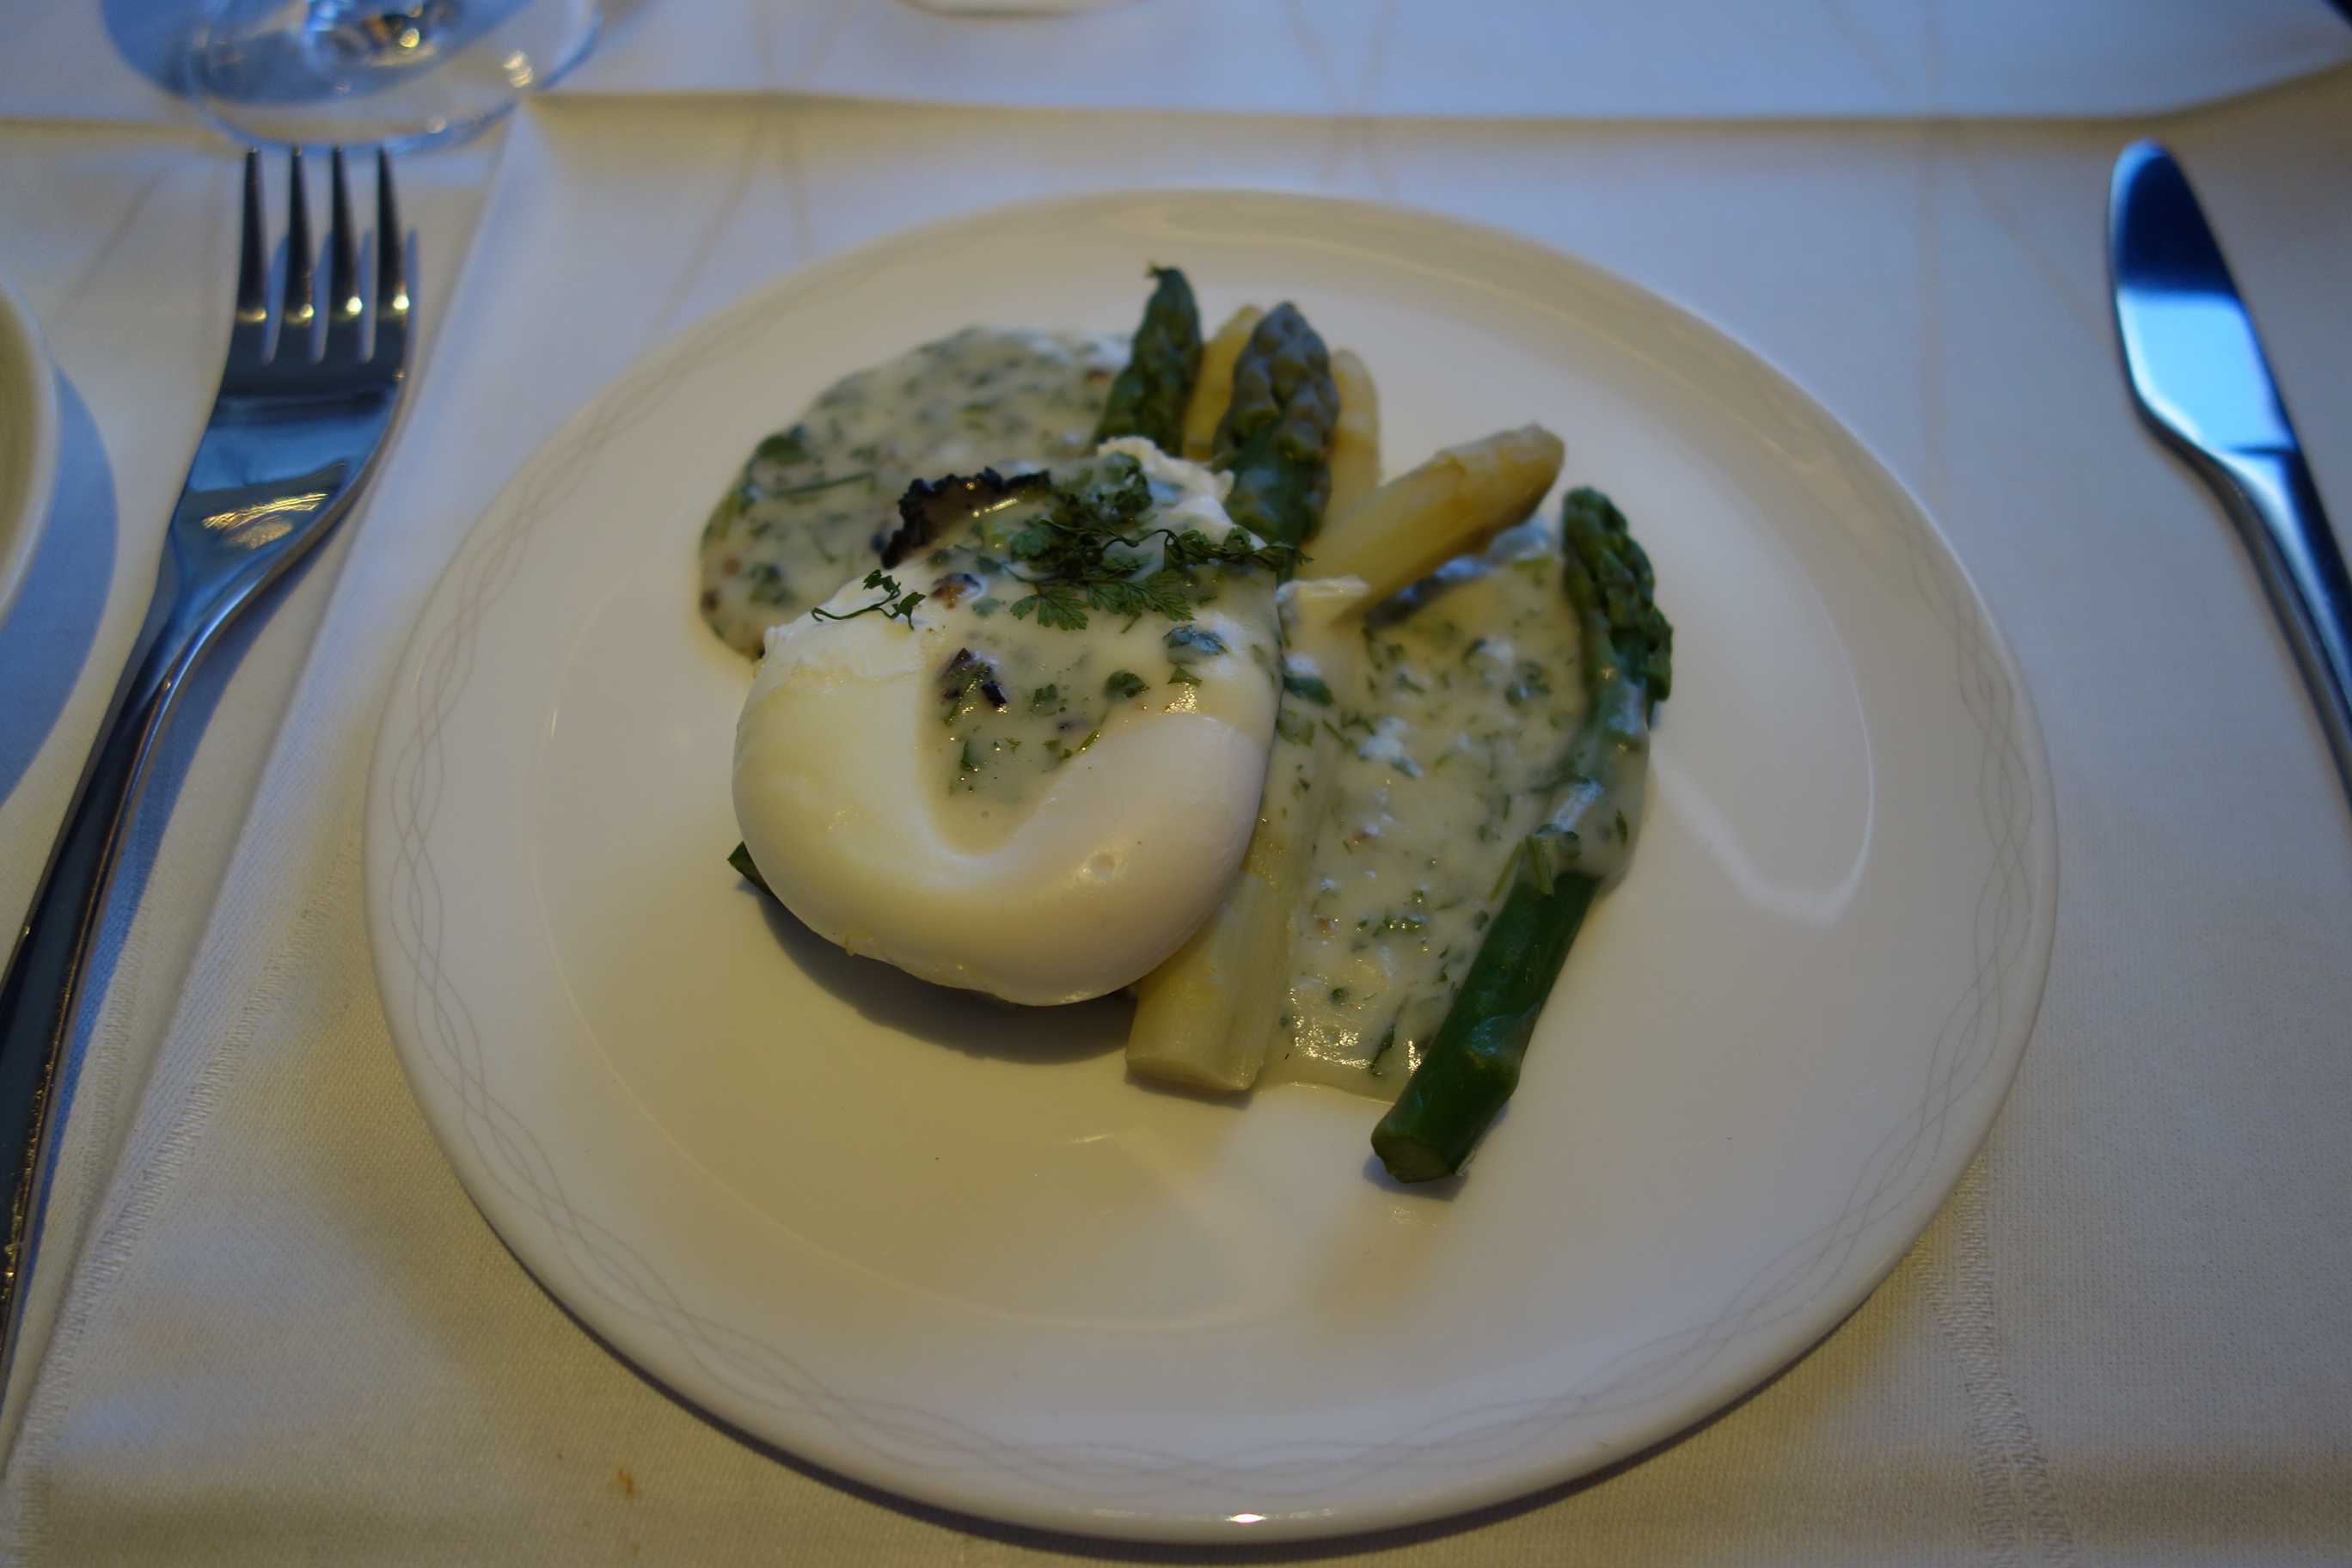 Asparagus with poached egg in truffle sauce